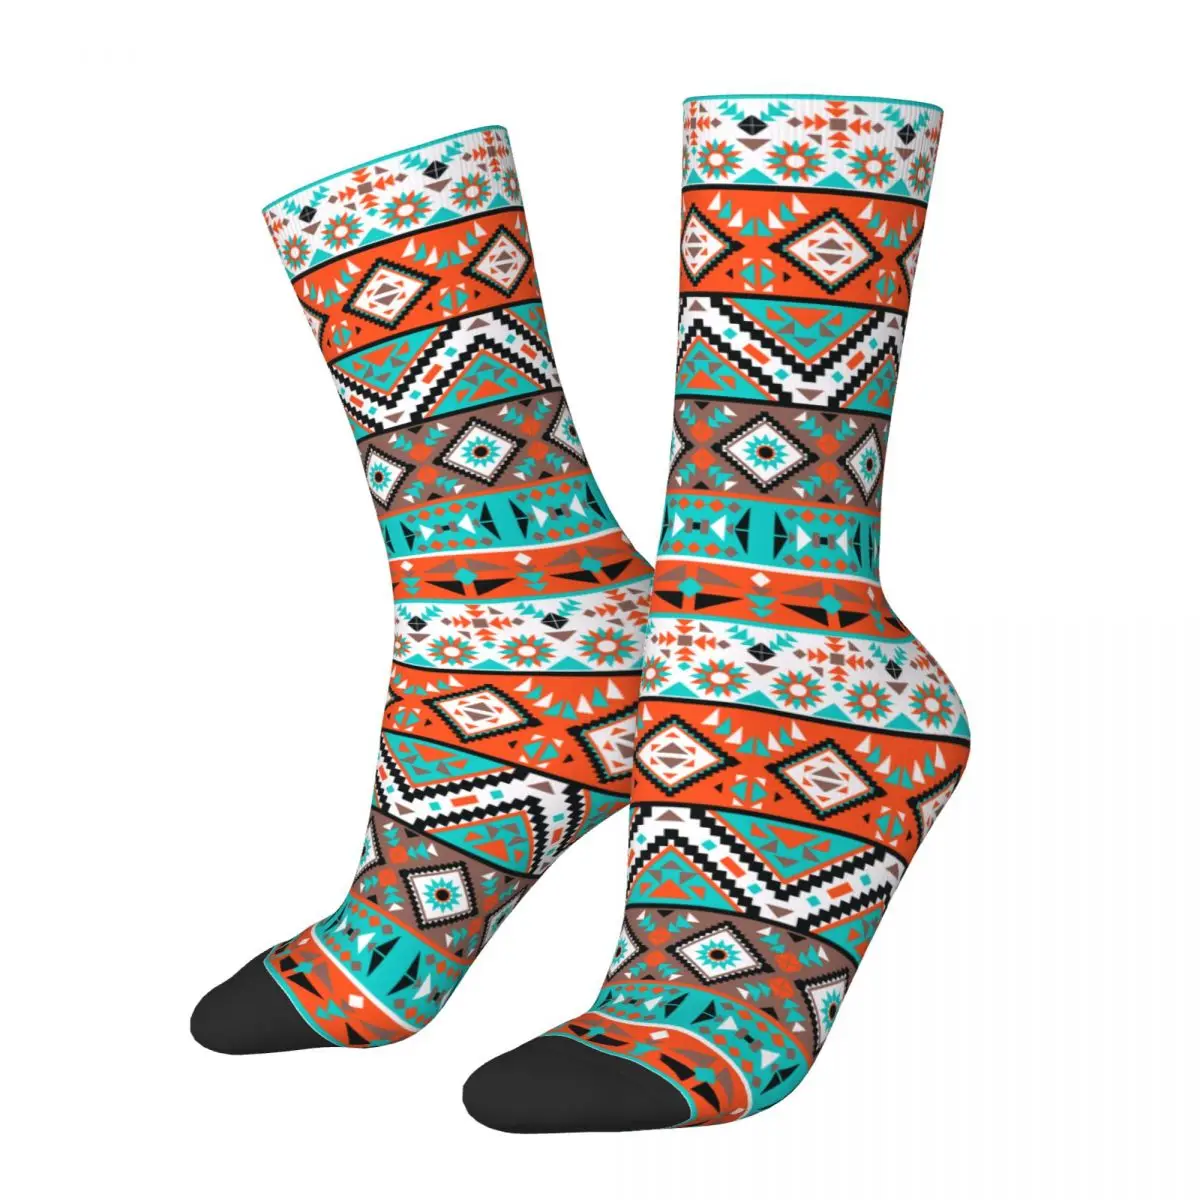 Male Navajo Southwest Socks Cotton Casual Socks High Quality Accessories Middle TubeSocks Small Gifts